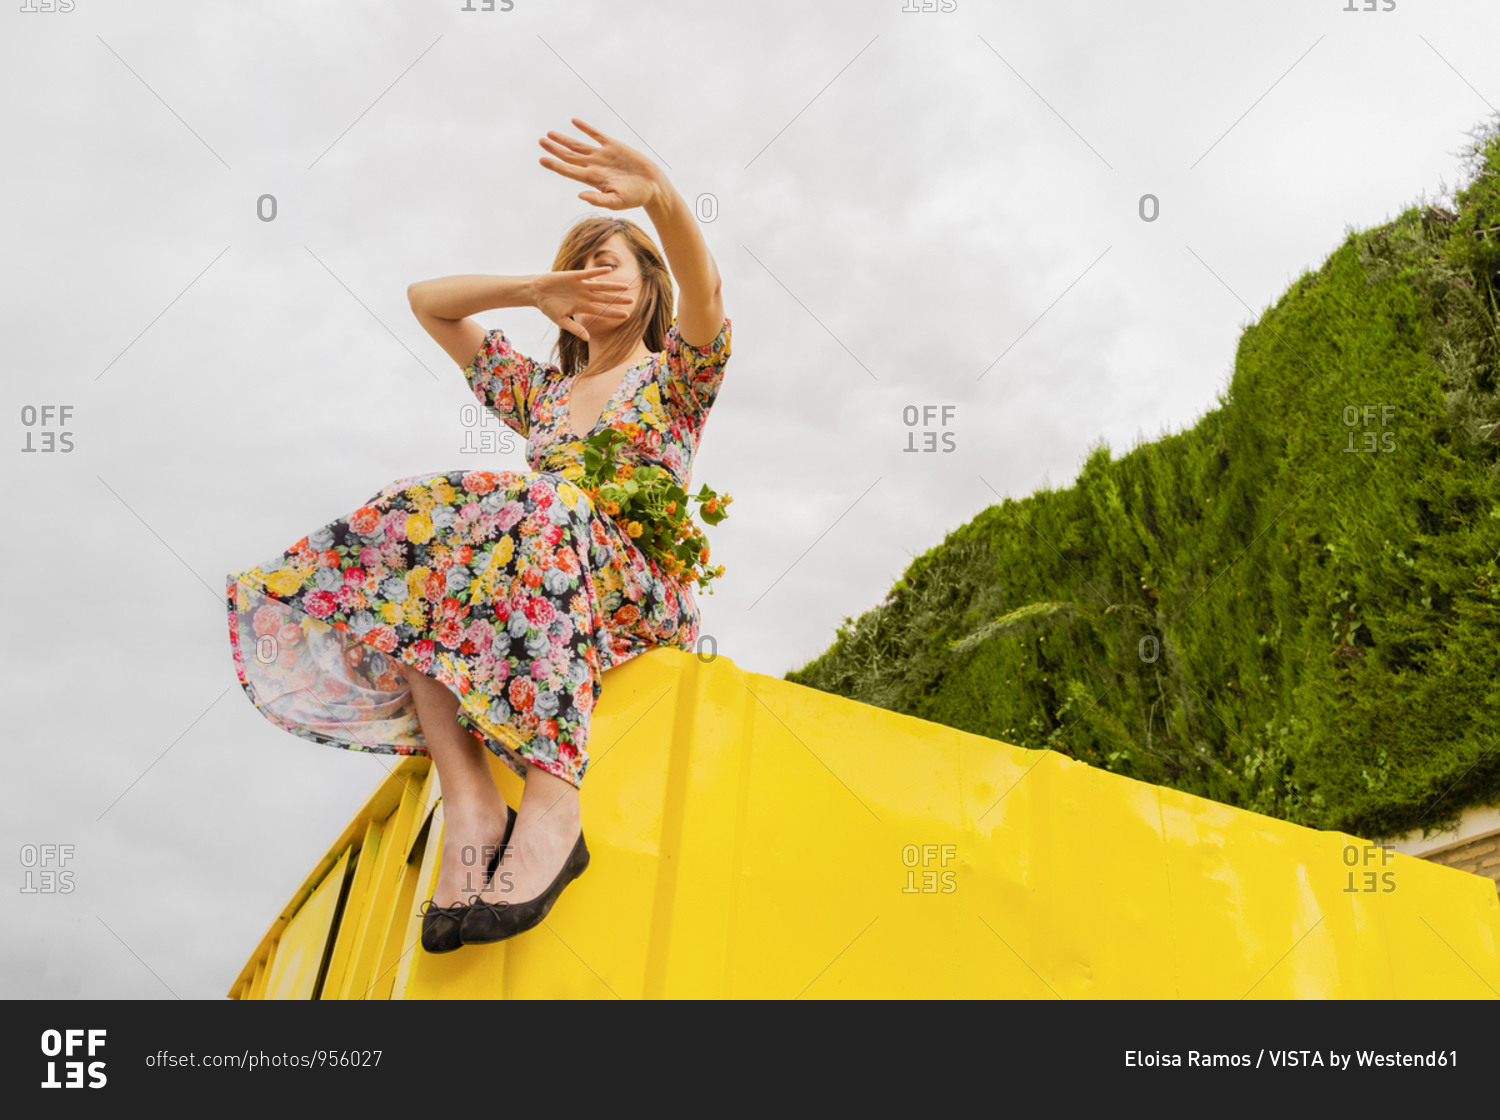 Woman in flower dress sitting on edge of yellow container with bunch of flowers in her lap- moving arms